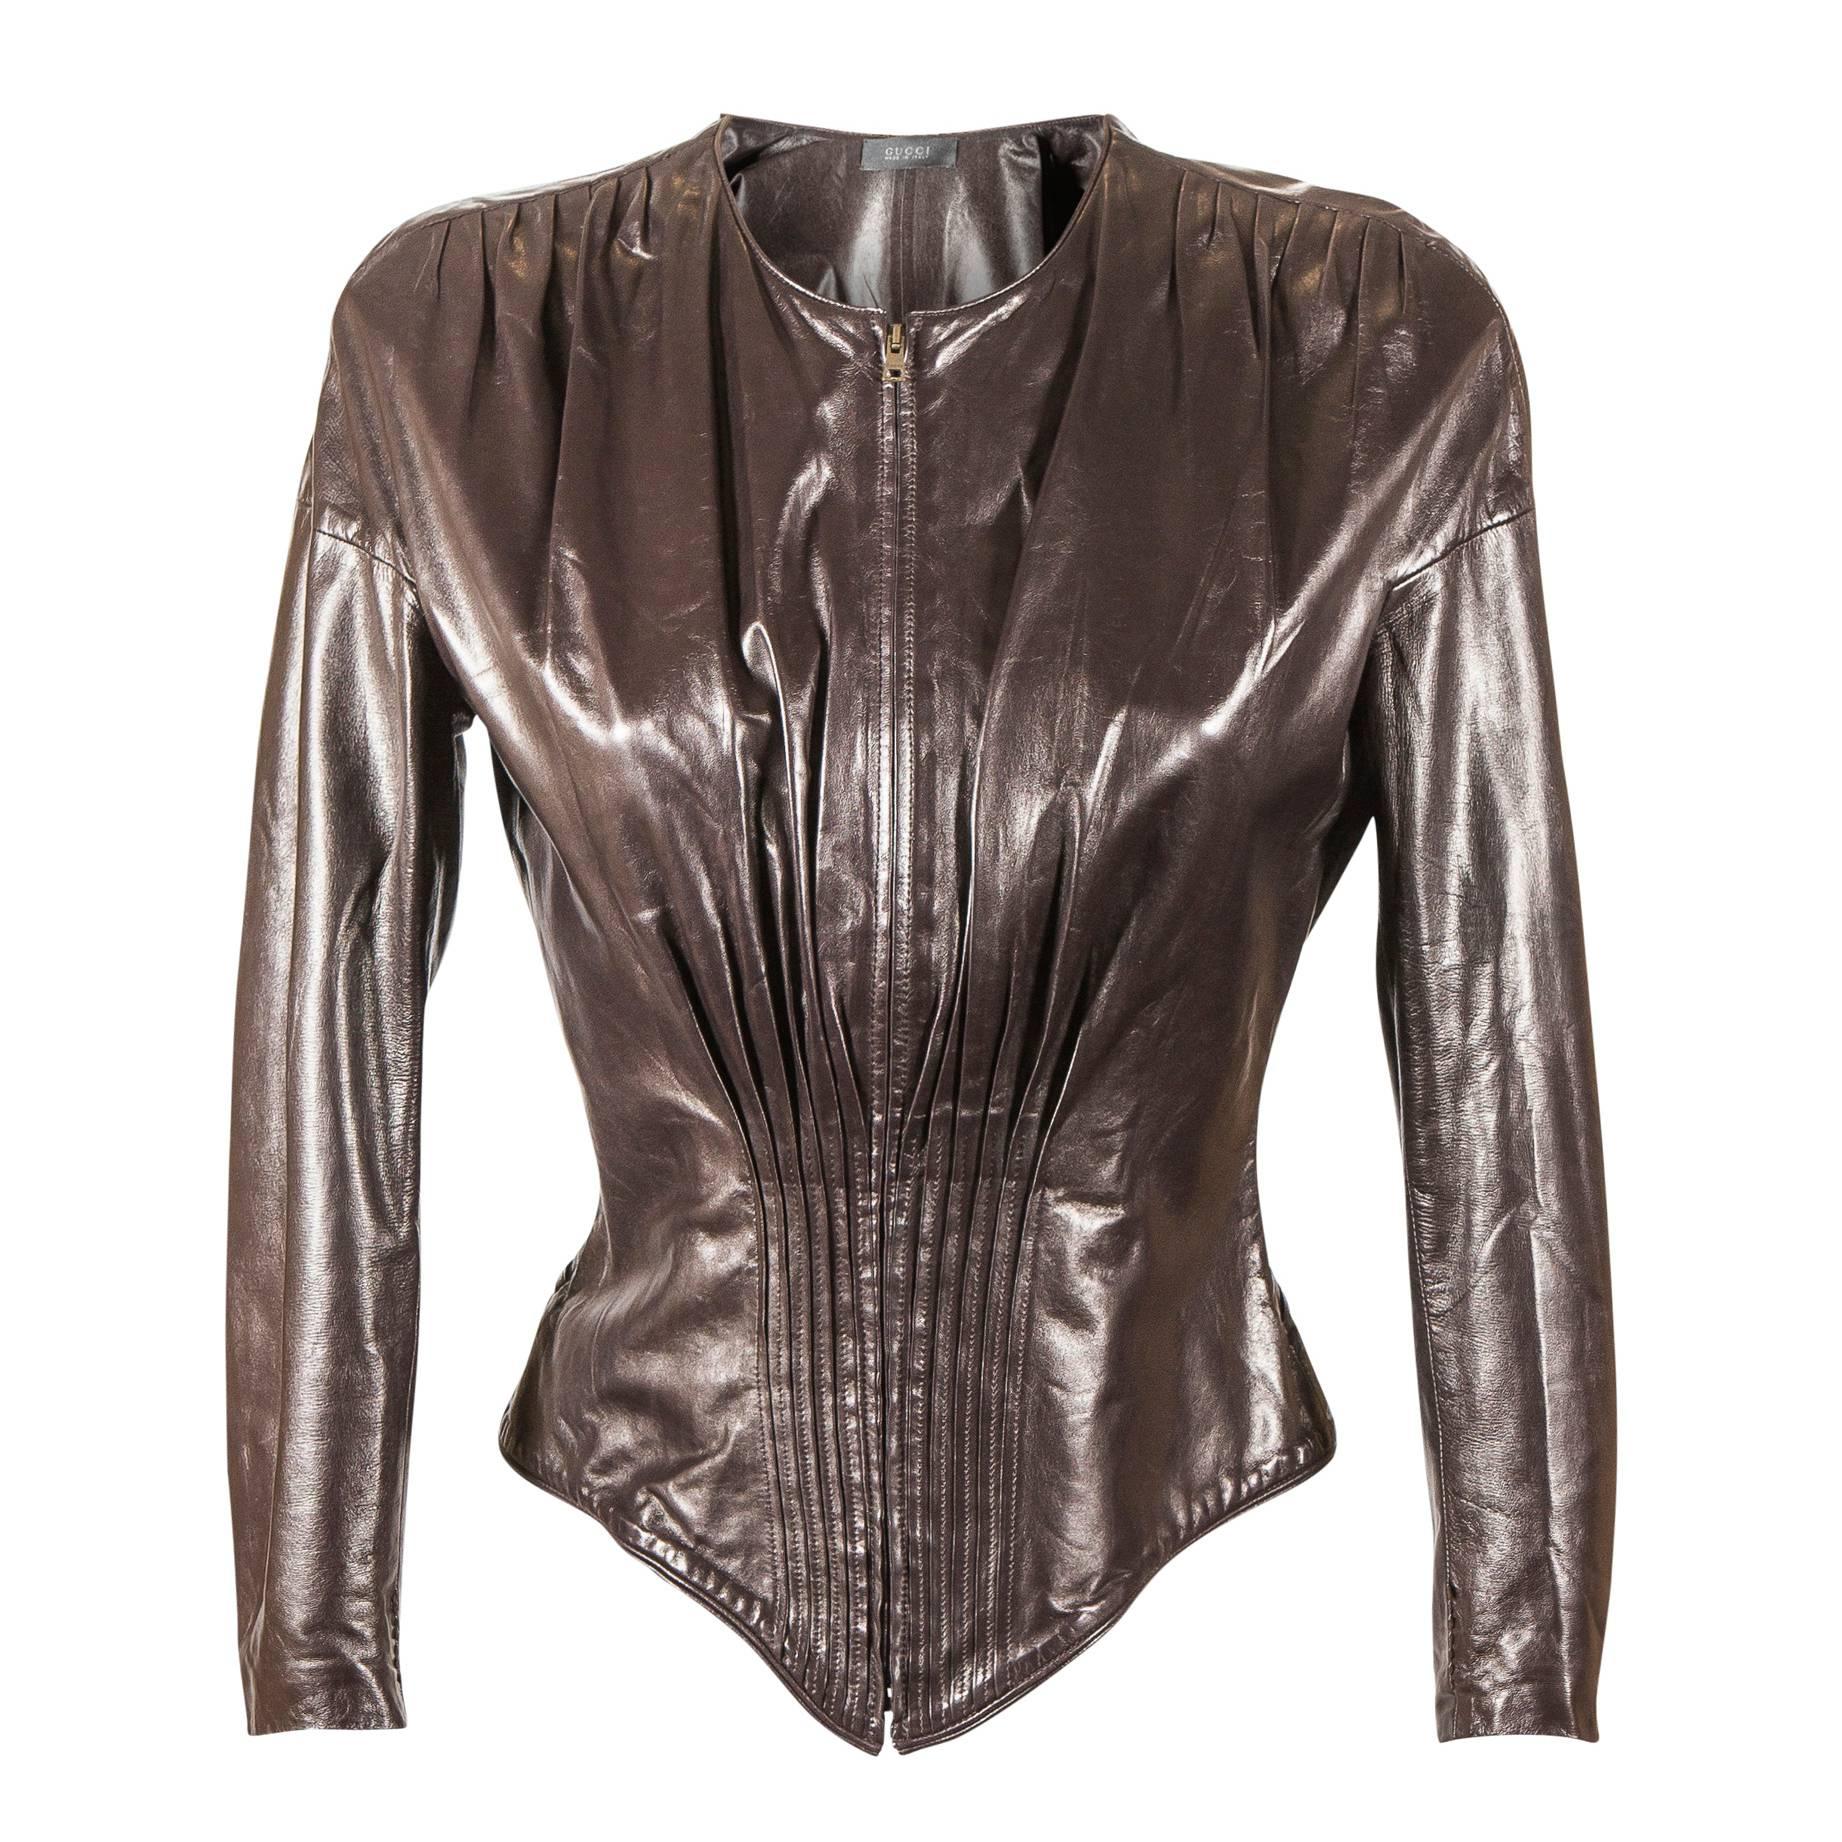 Tom Ford for Gucci Fall 2003 Brown leather corset jacket 